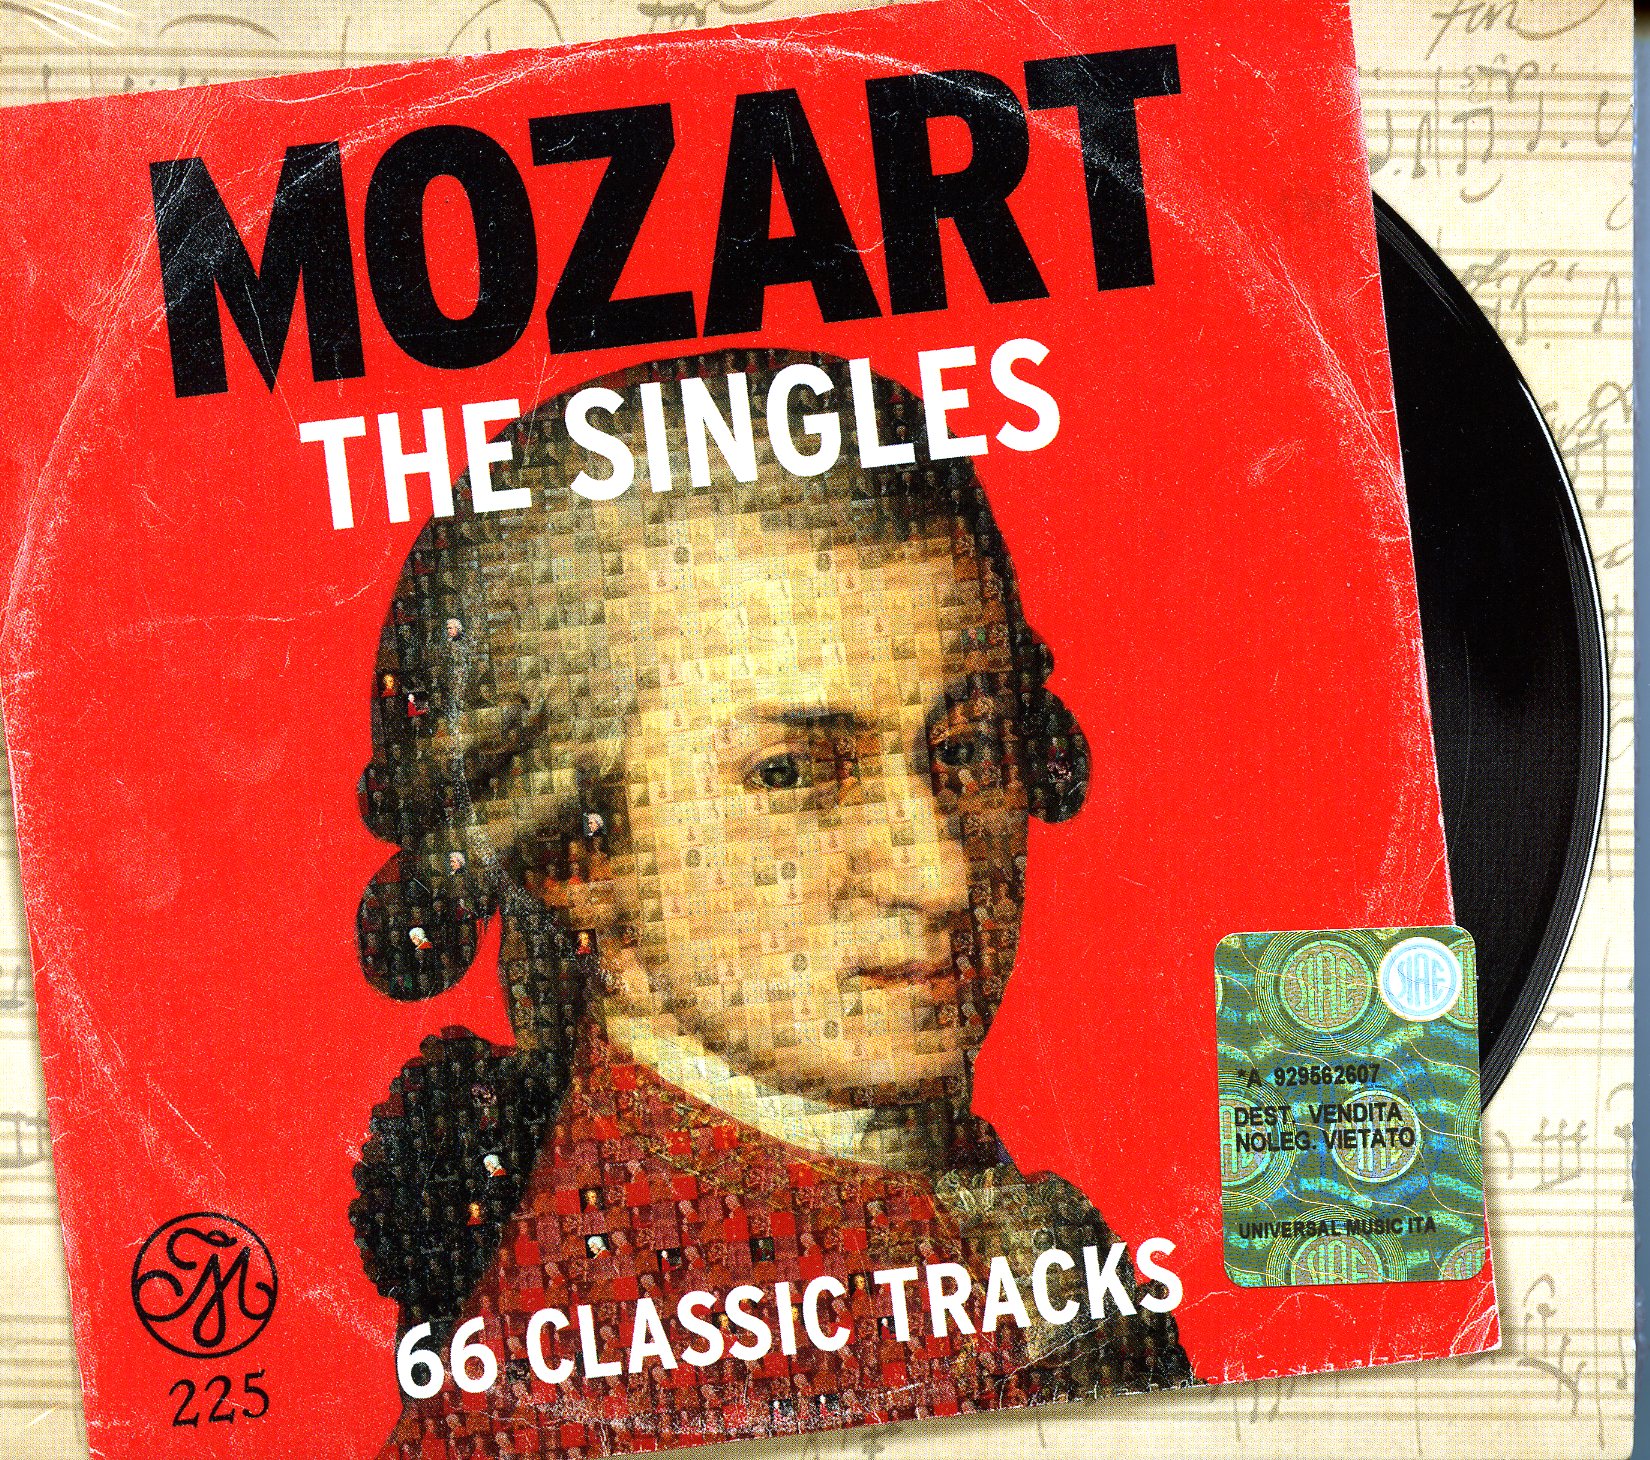 MOZART 225: THE SINGLES CO